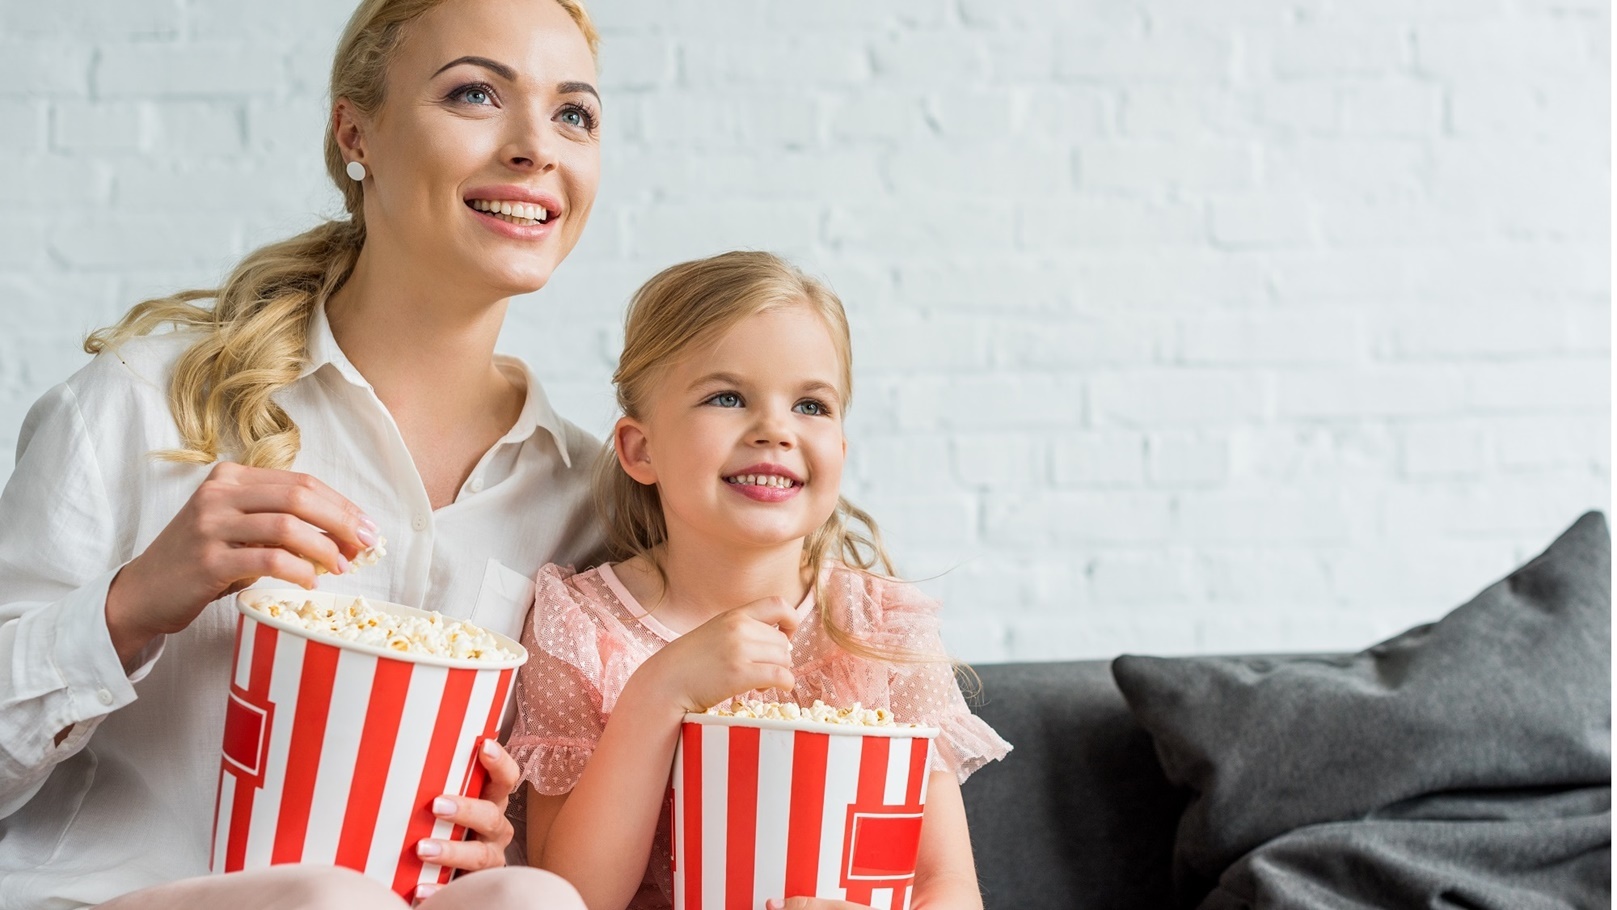 happy-mother-and-daughter-eating-popcorn-and-looki-2022-01-19-00-05-10-utc